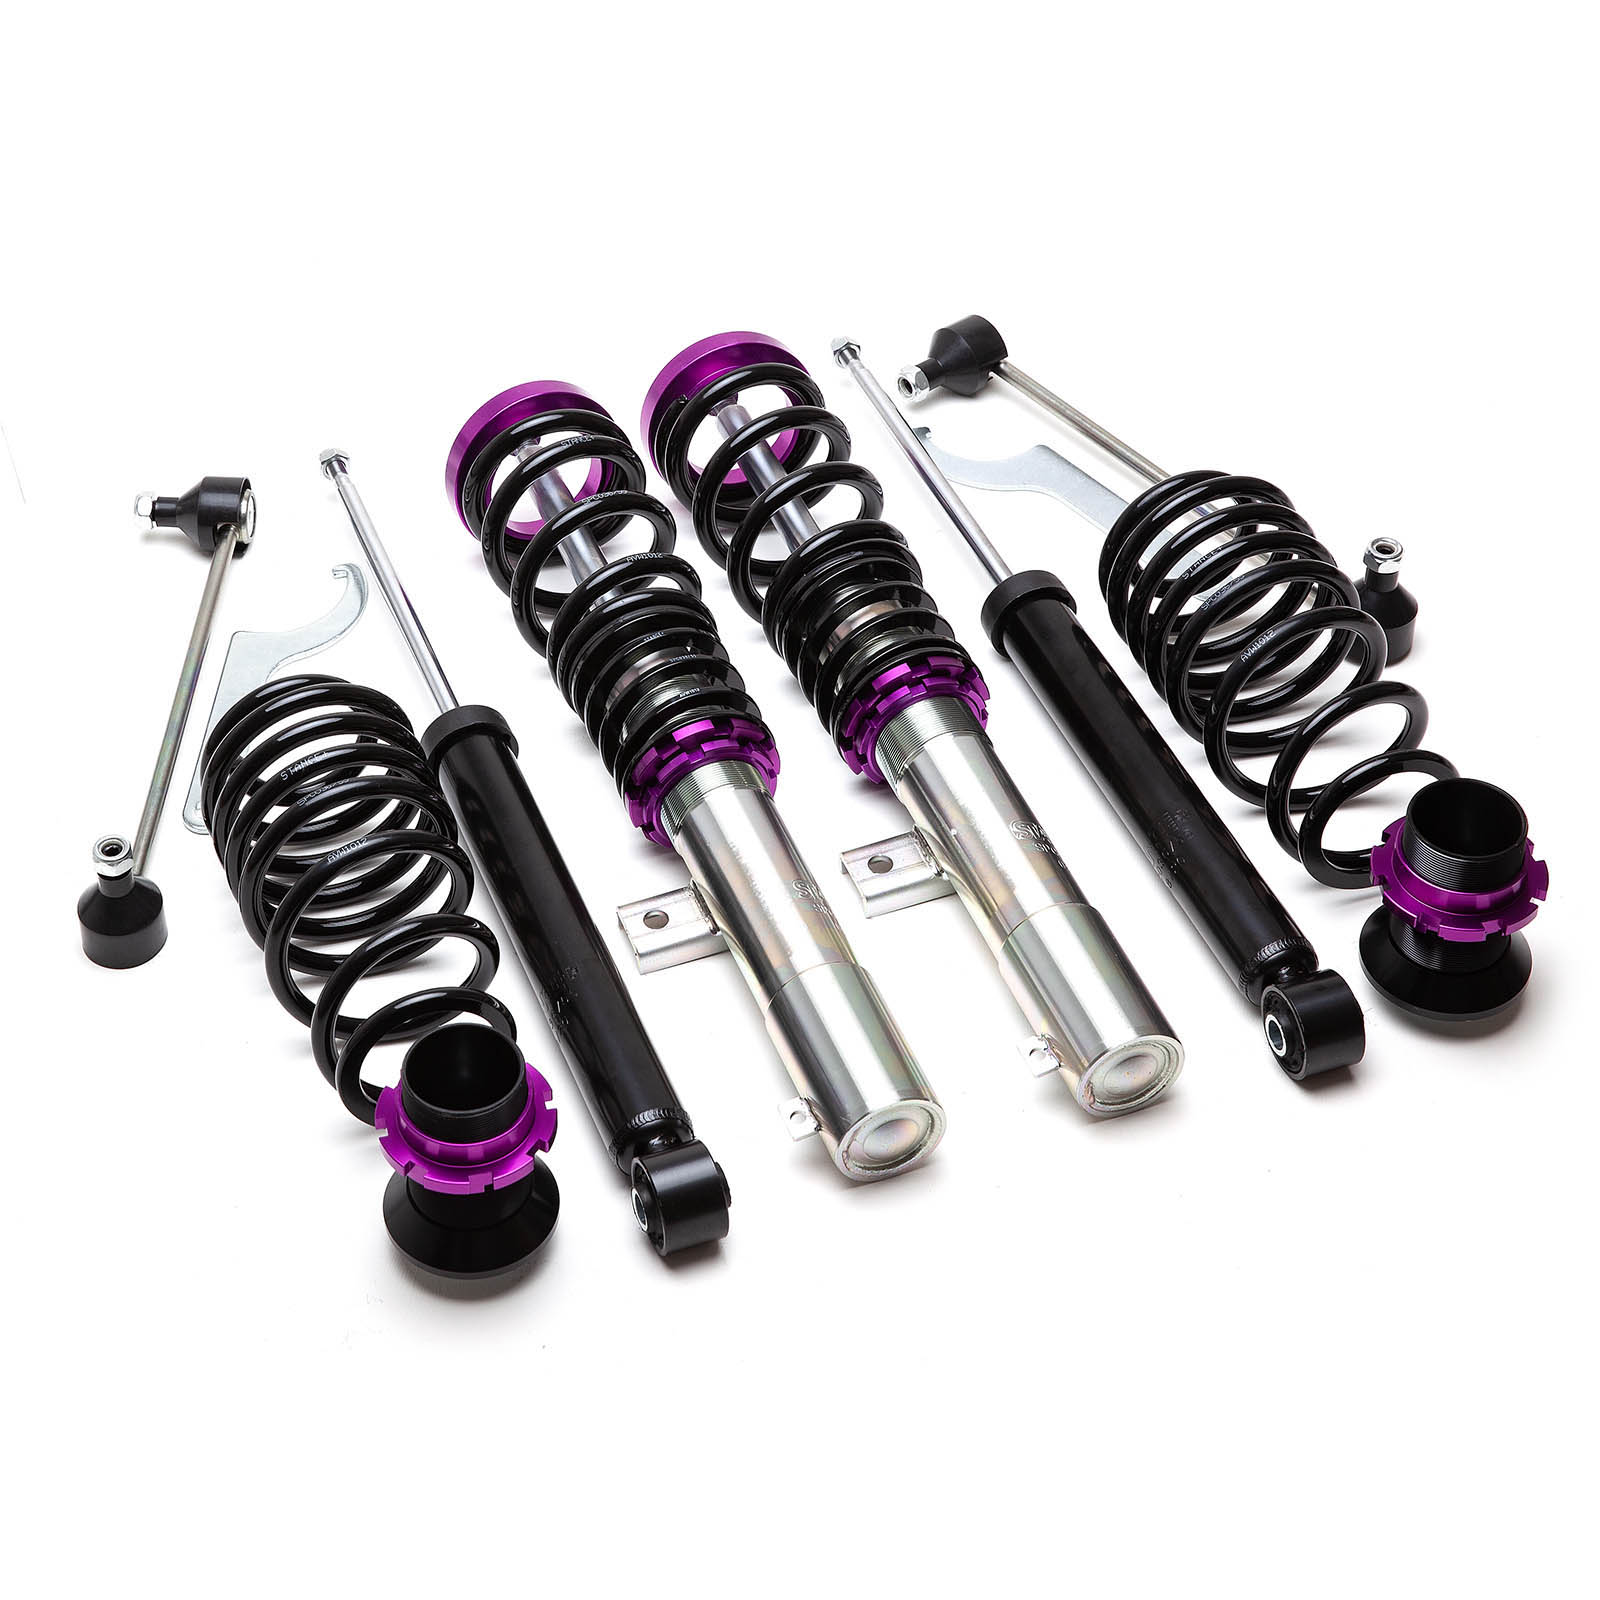 B7/3C 2WD All Engines Stance+ Street Coilovers Suspension Kit VW Passat Mk5 